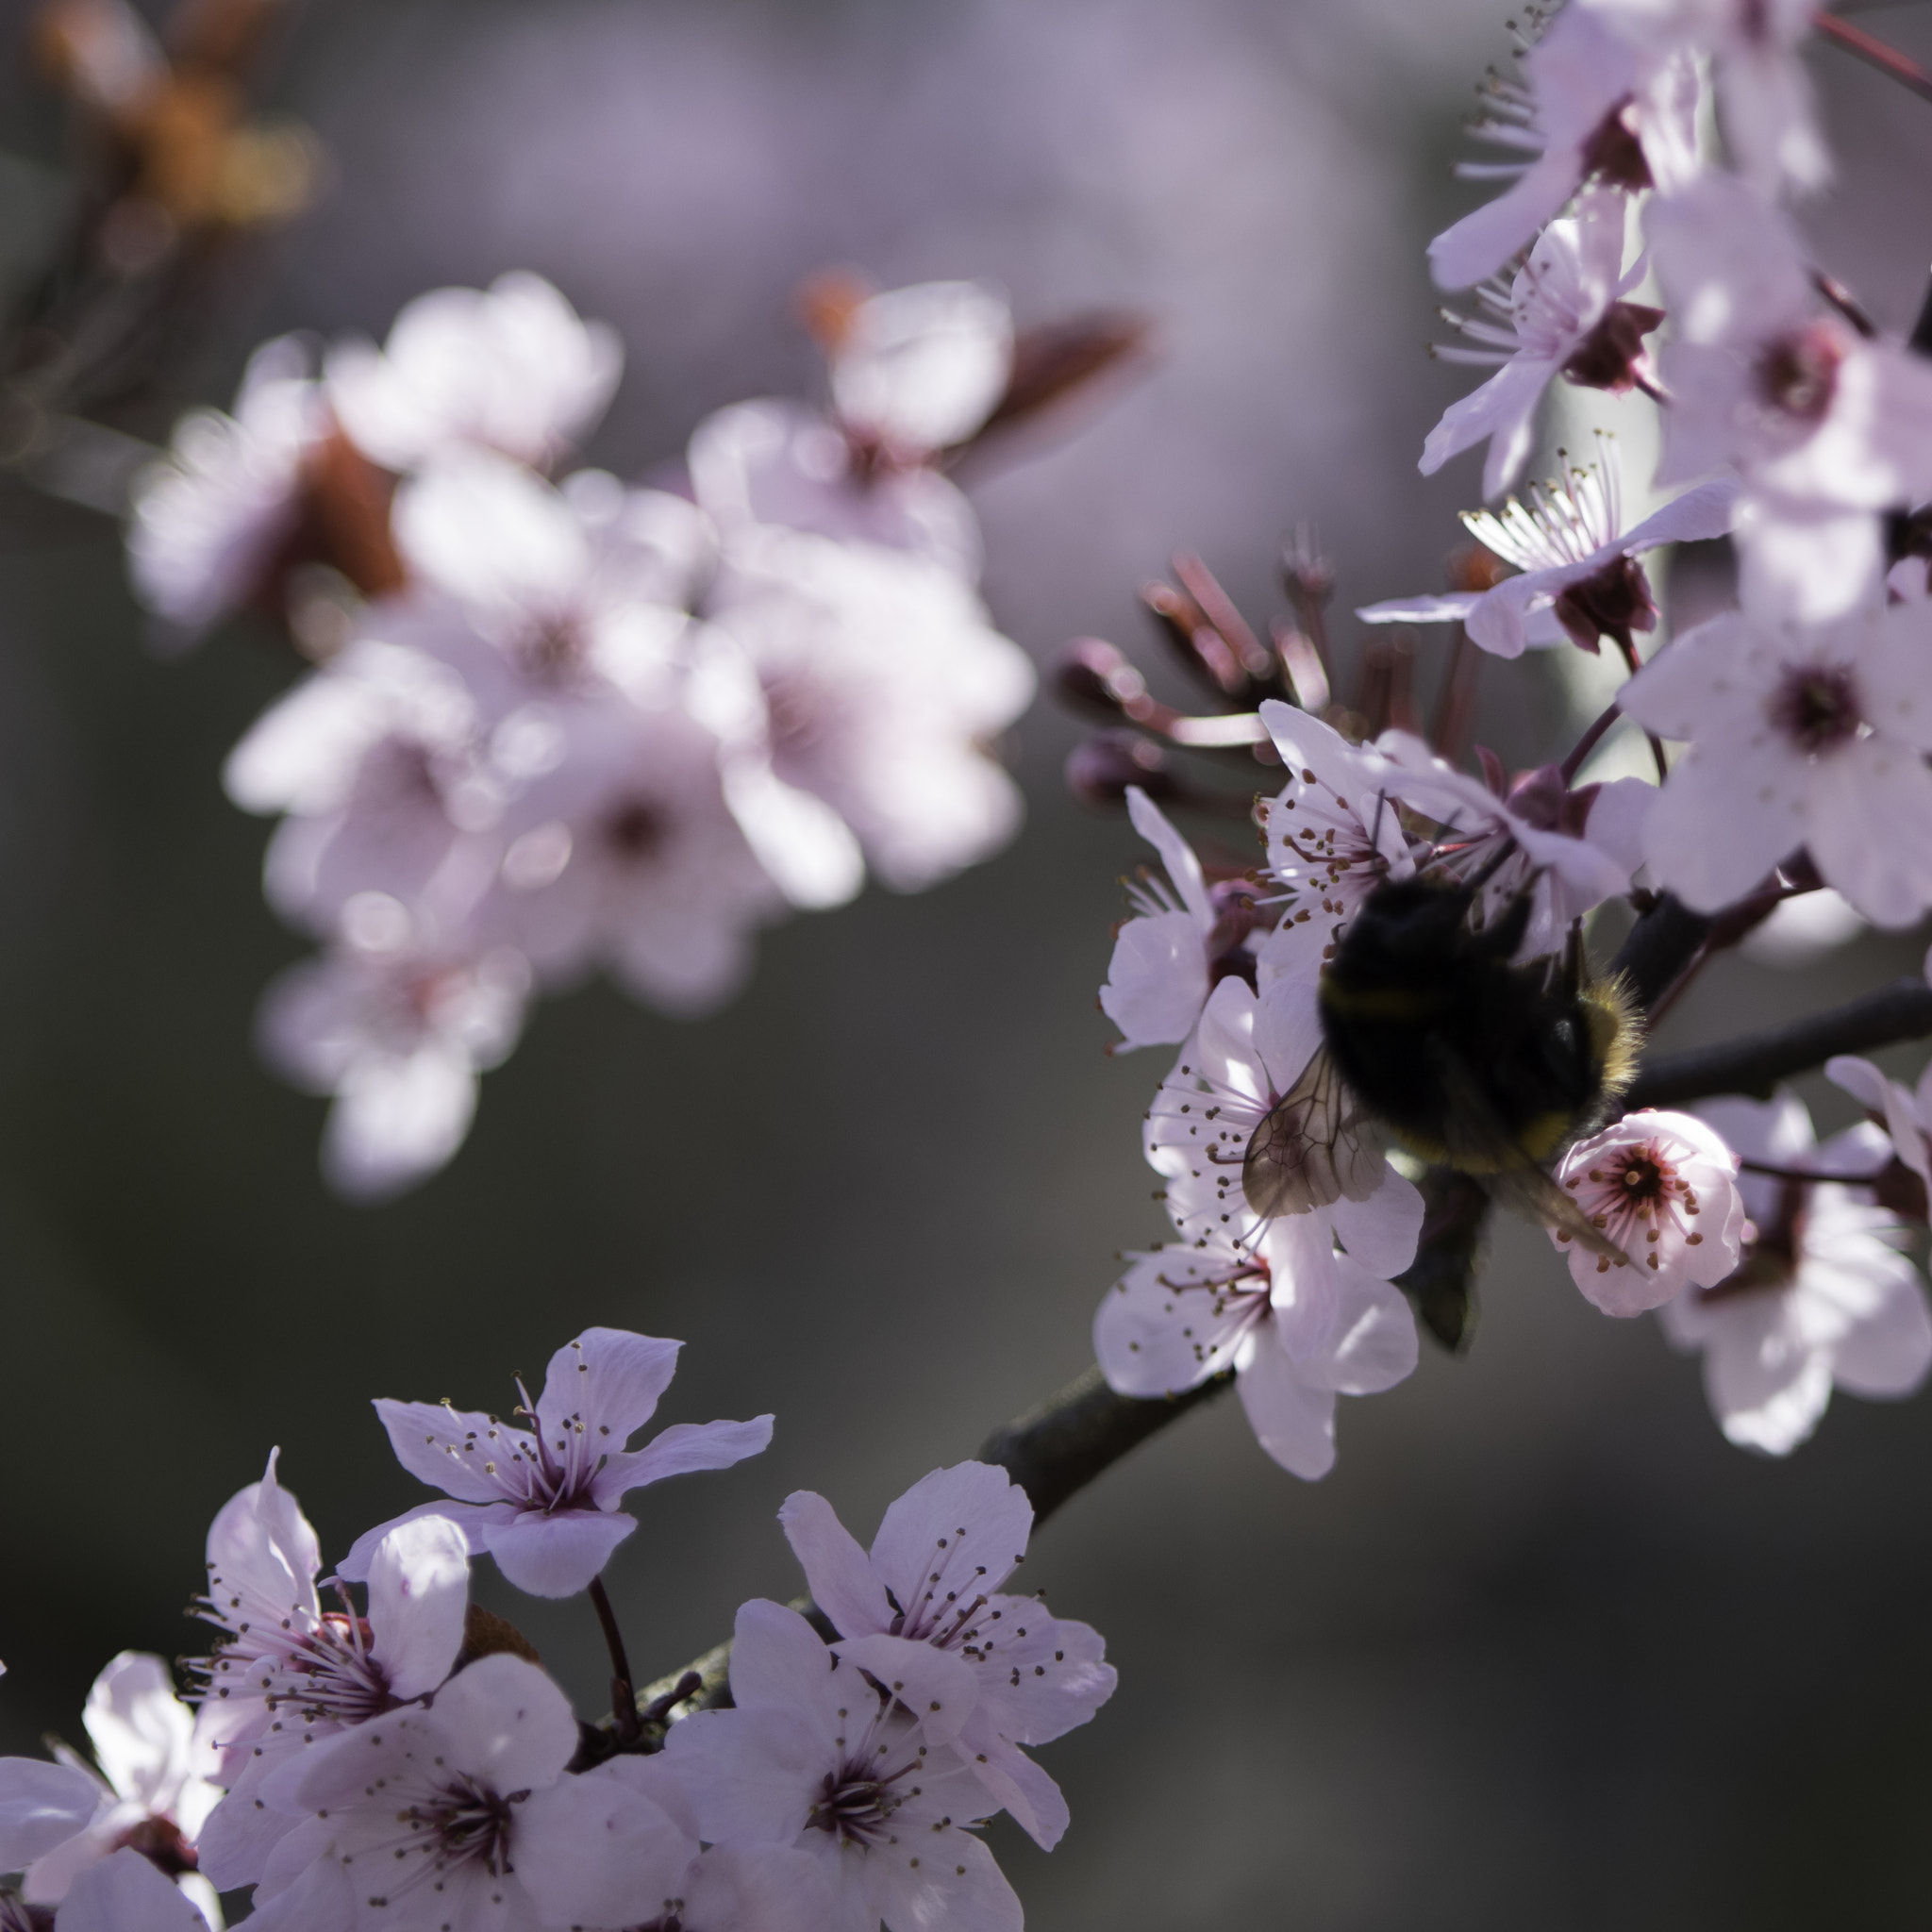 Pentax K-3 II sample photo. Bee and blossom photography